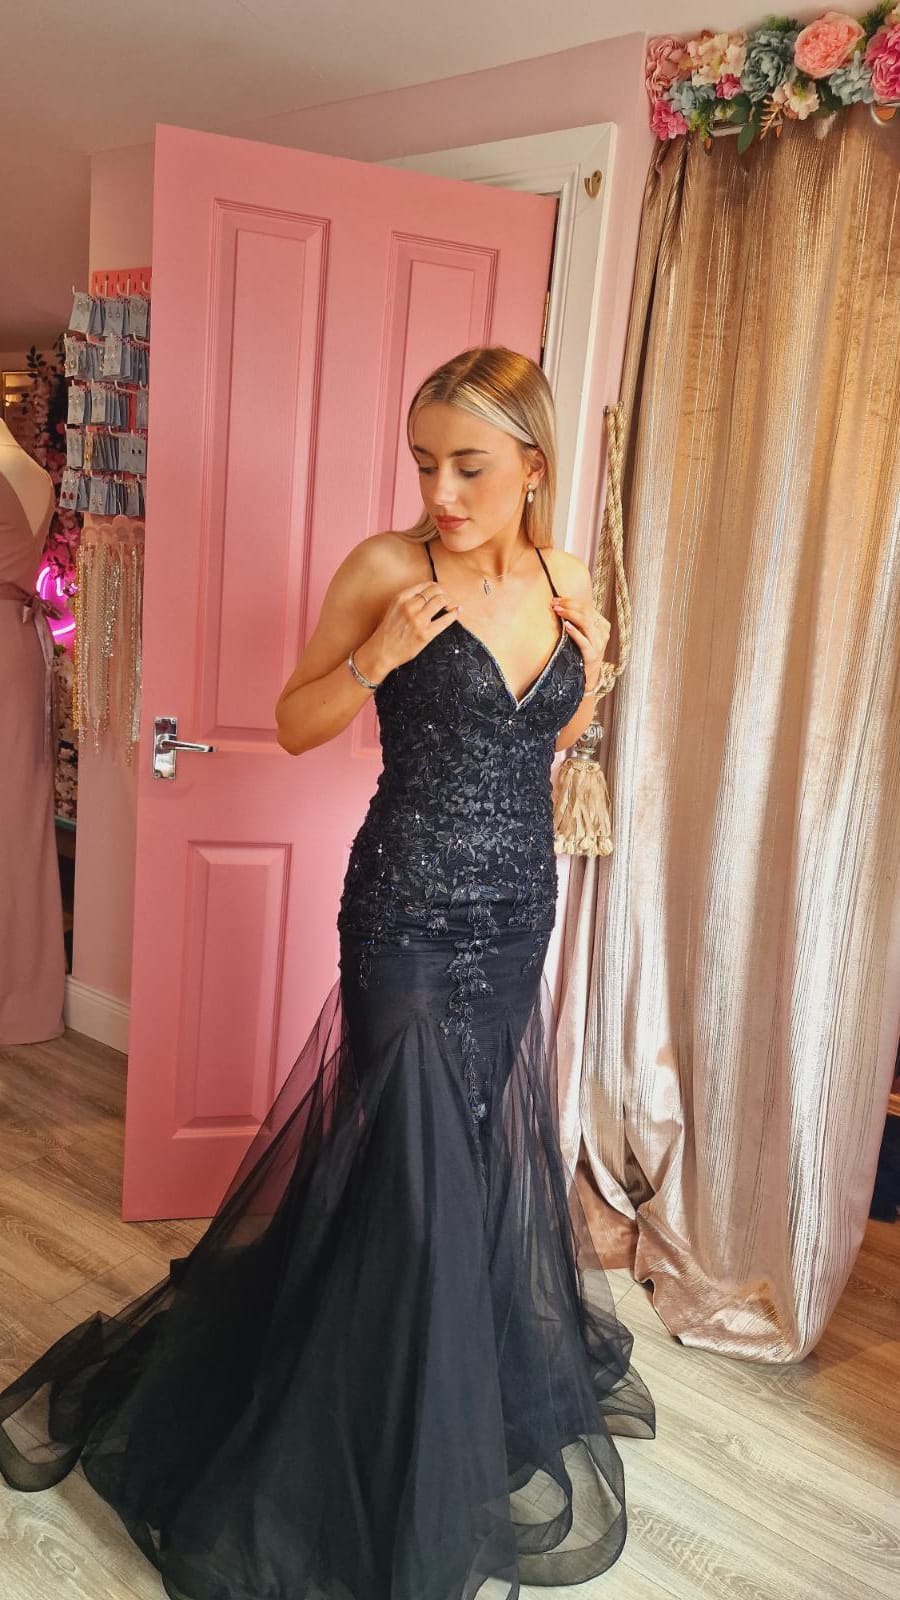 Natasha Black Embroidered Bodice With Laced Back Formal Prom Dress